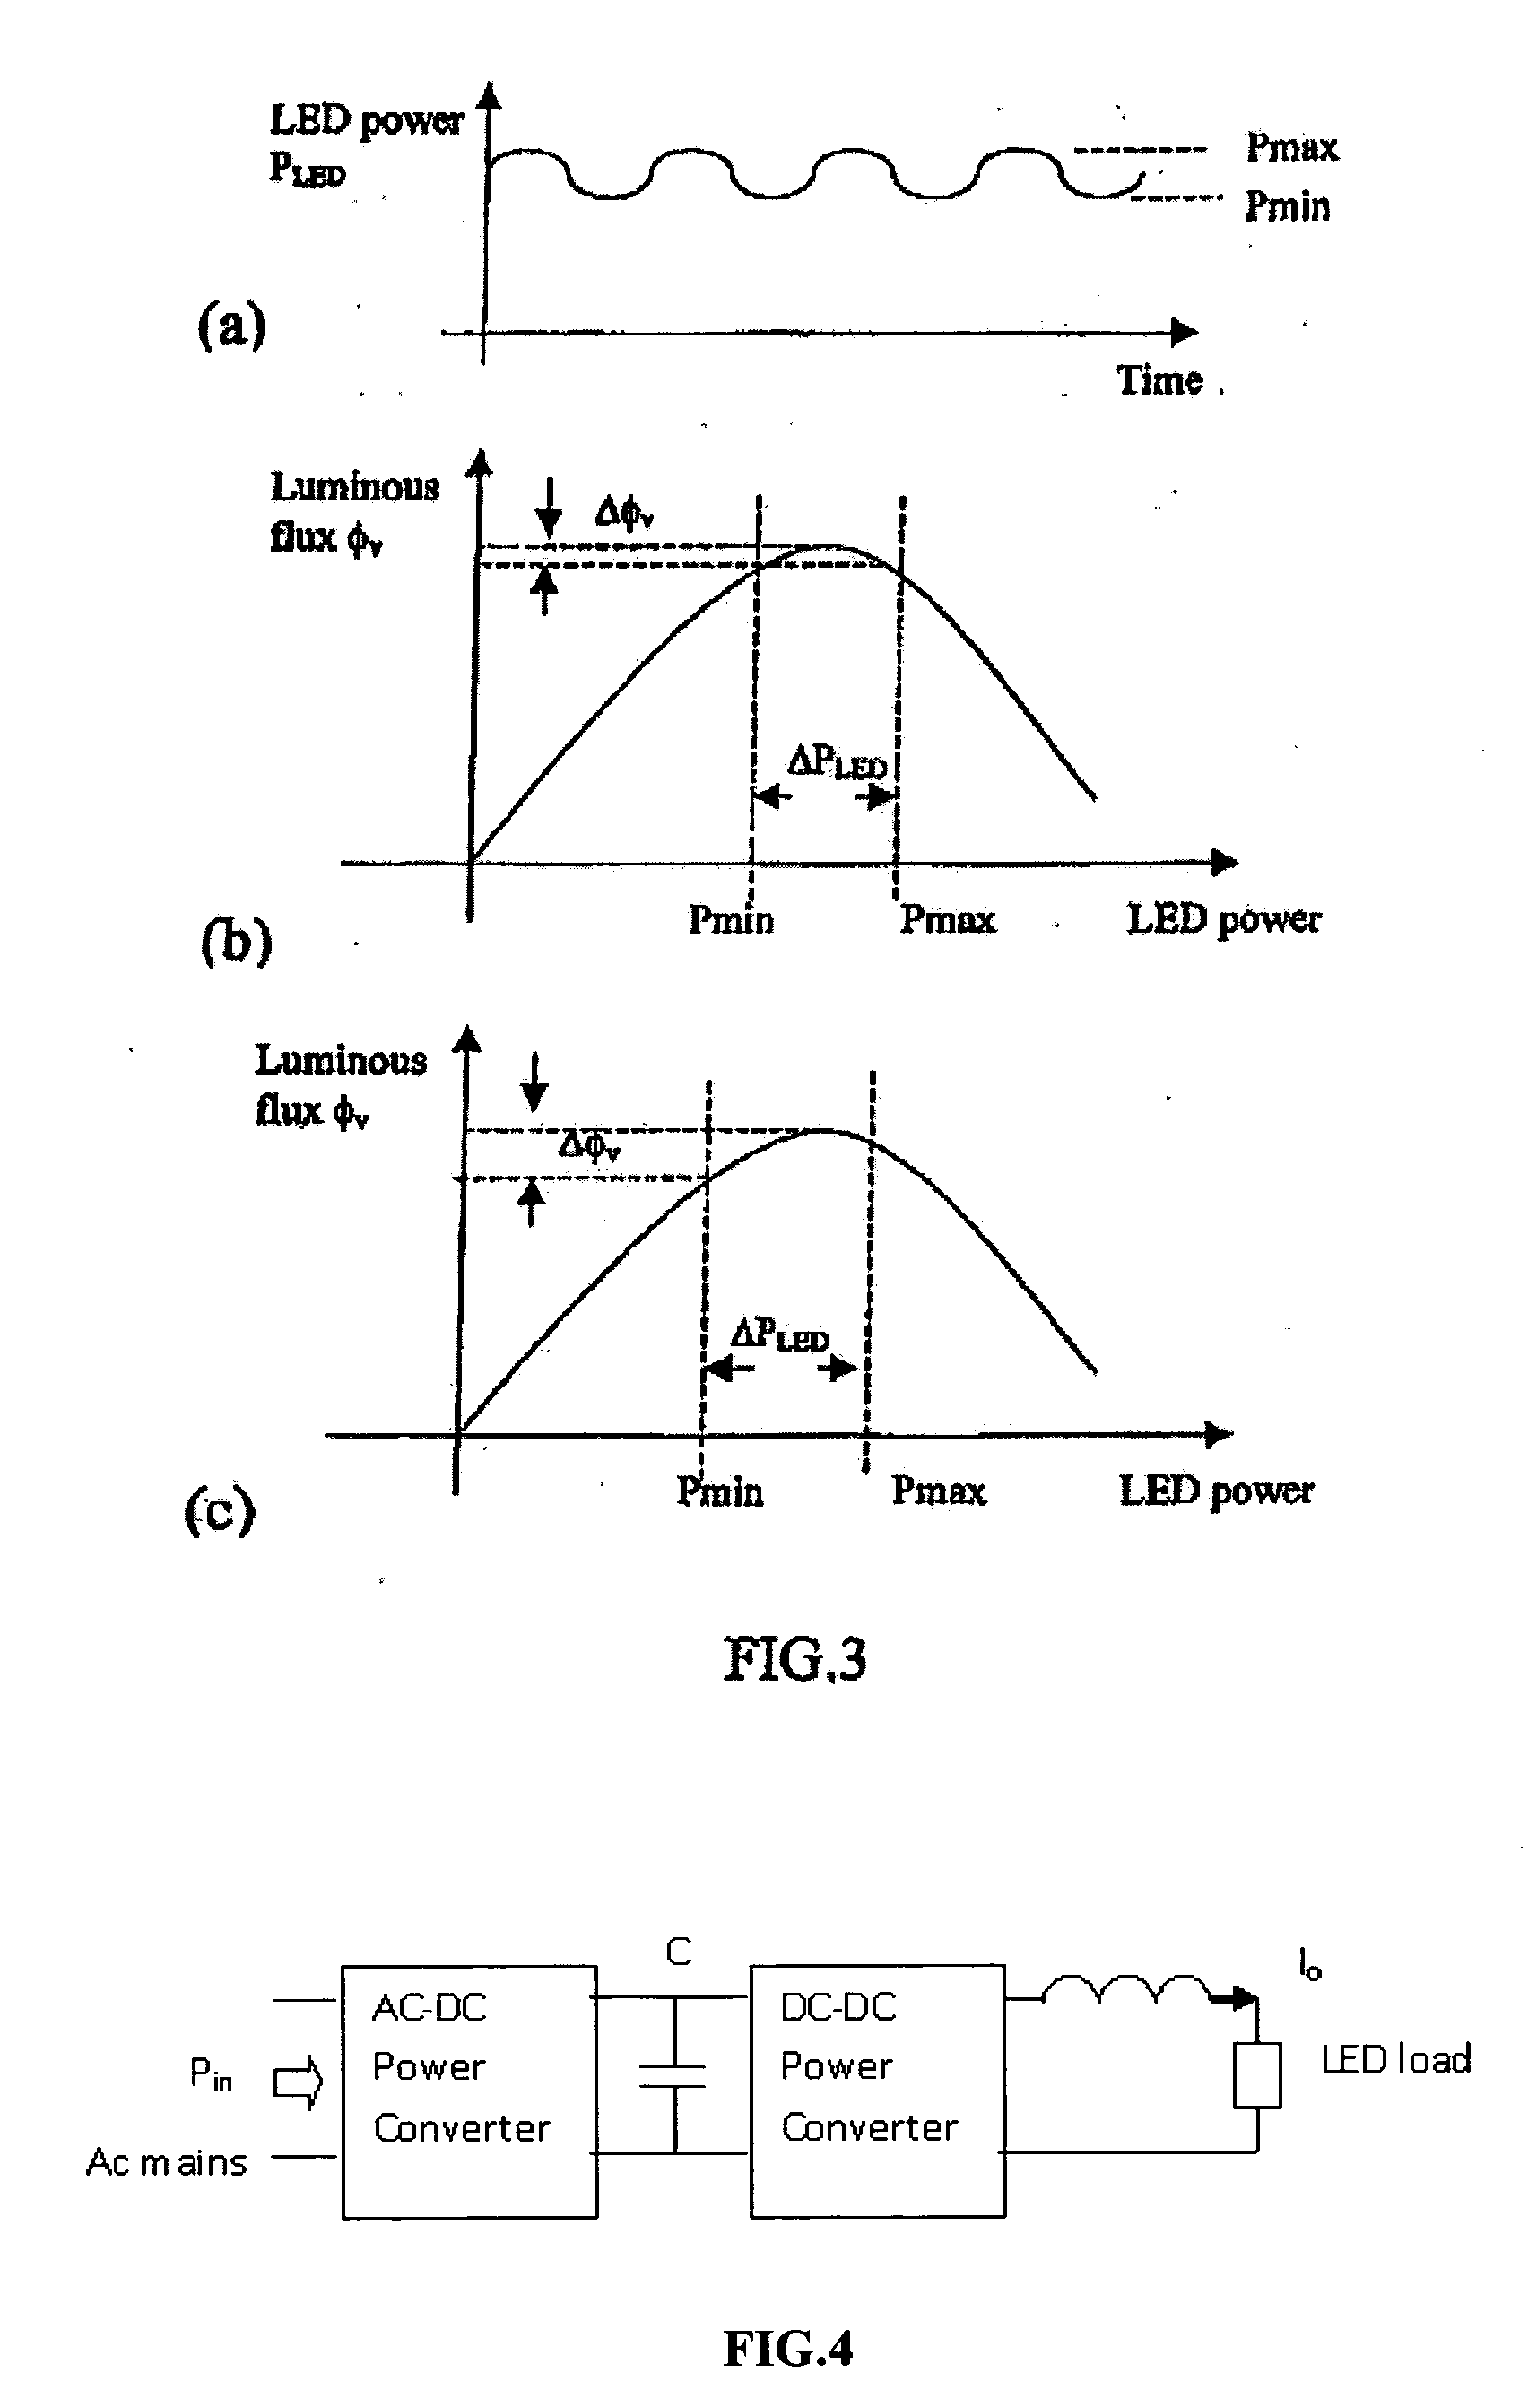 Apparatus and methods of operation of passive and active LED lighting equipment